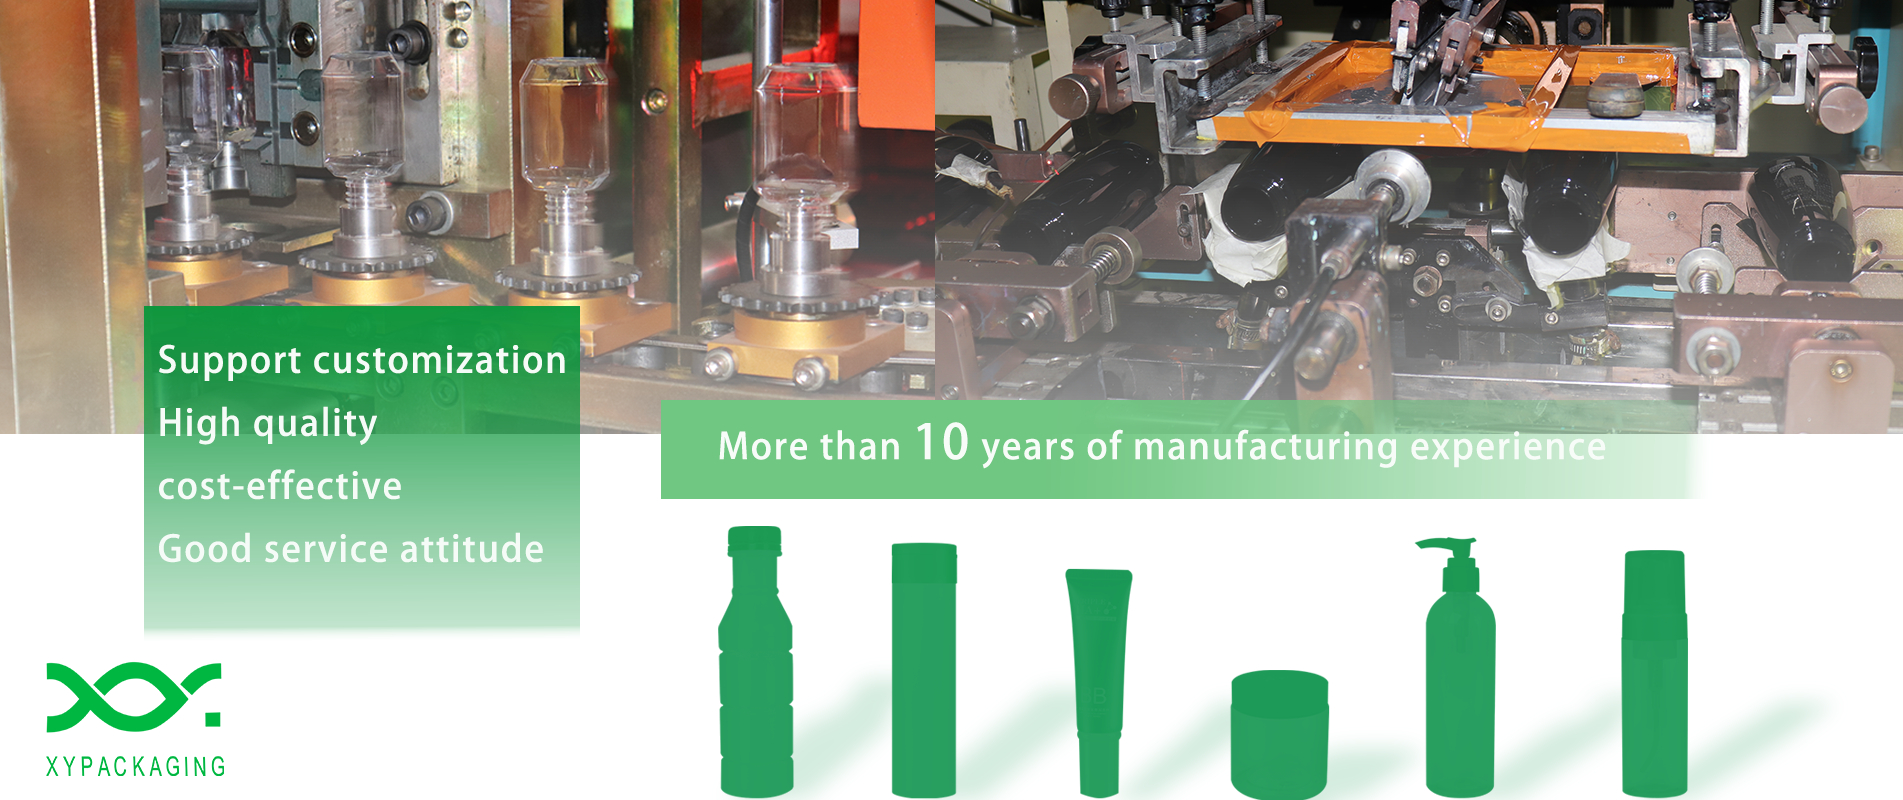 About bottle making process